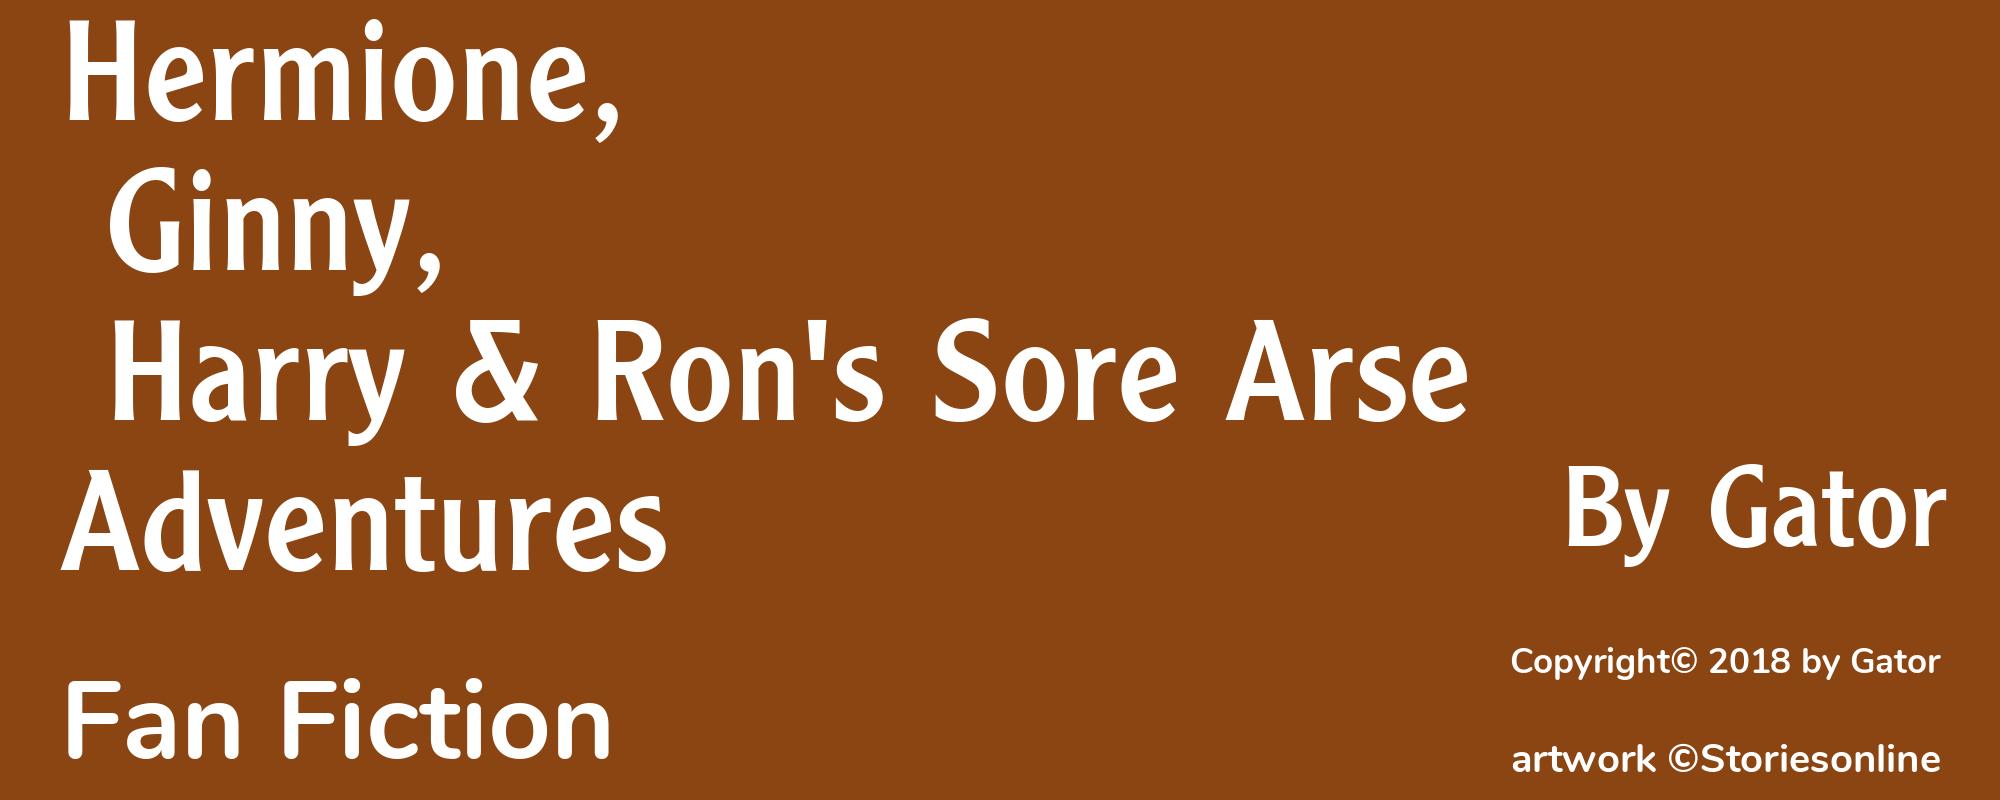 Hermione, Ginny, Harry & Ron's Sore Arse Adventures - Cover